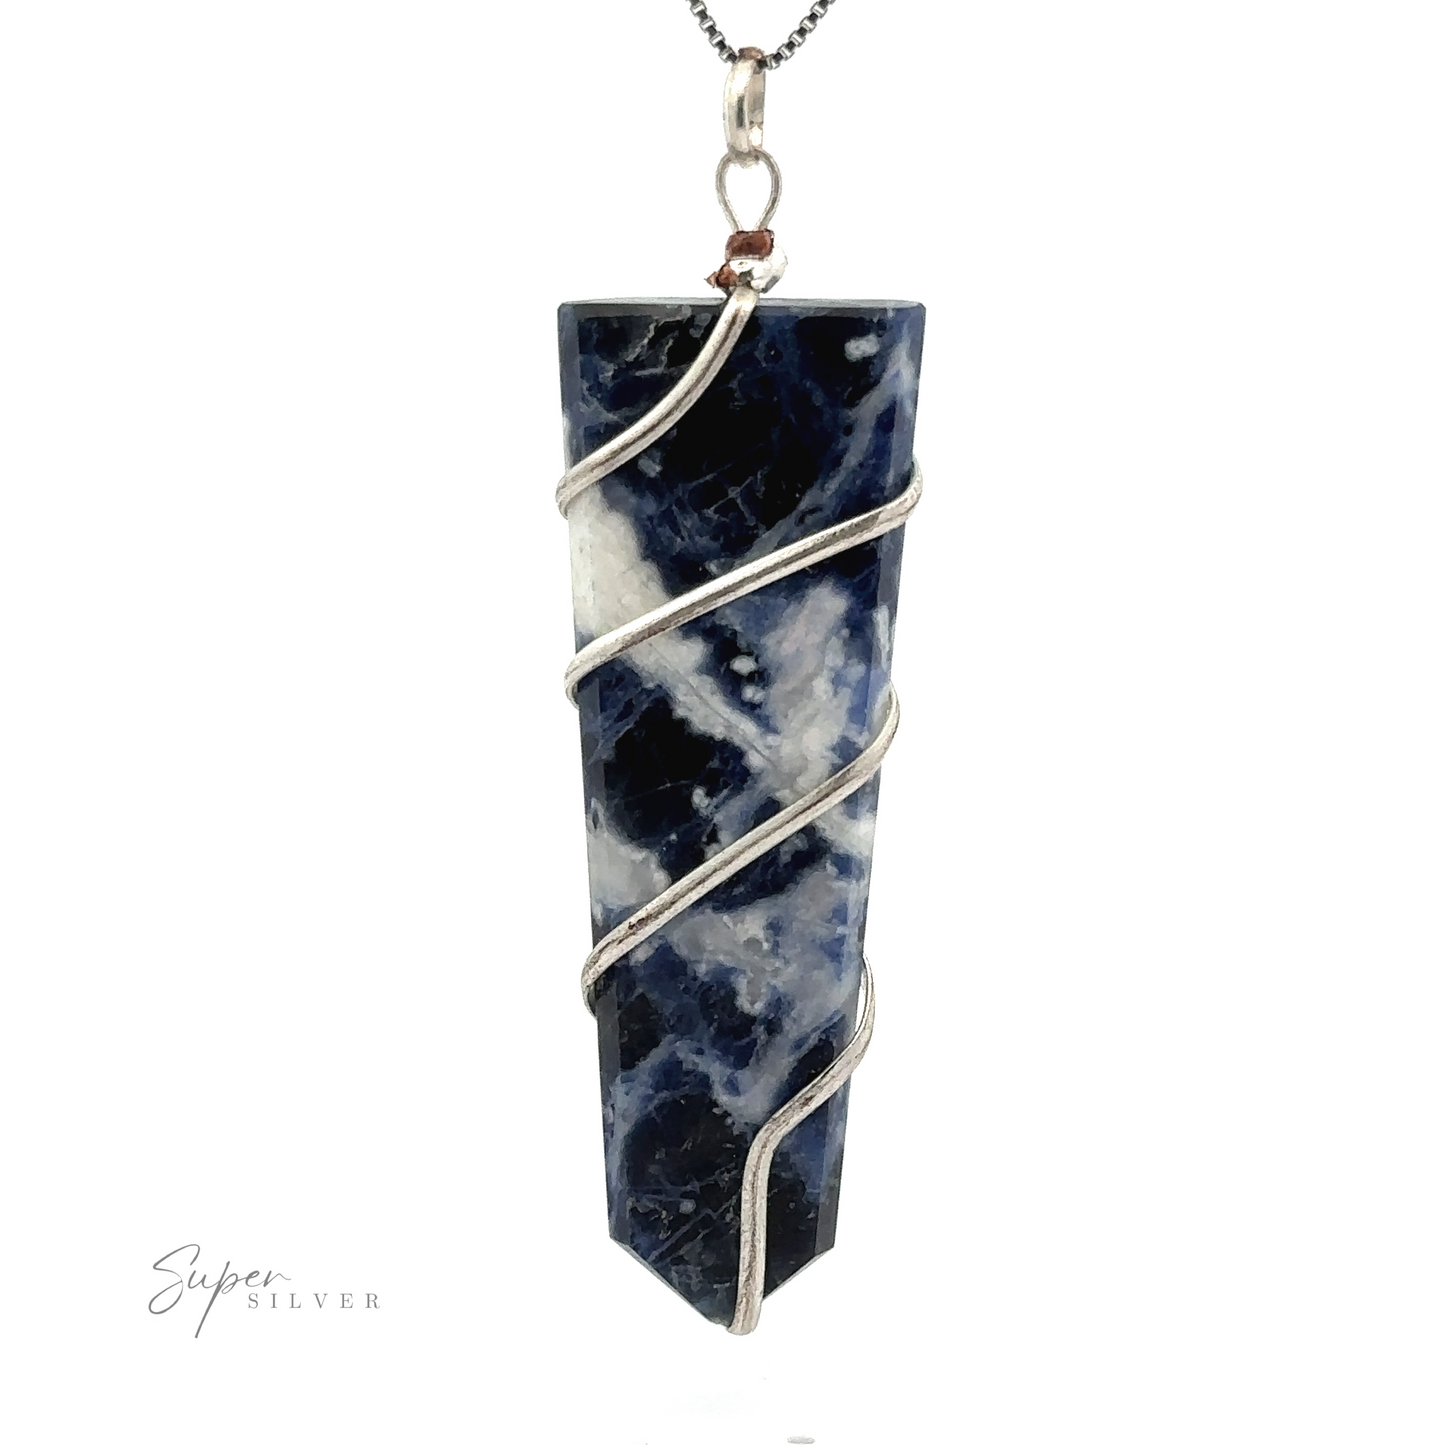 
                  
                    A blue and white gemstone pendant, expertly wire wrapped in silver, hangs gracefully from a thin chain. The Wire Wrapped Slab Pendant showcases the elegance of fine gemstone jewelry.
                  
                